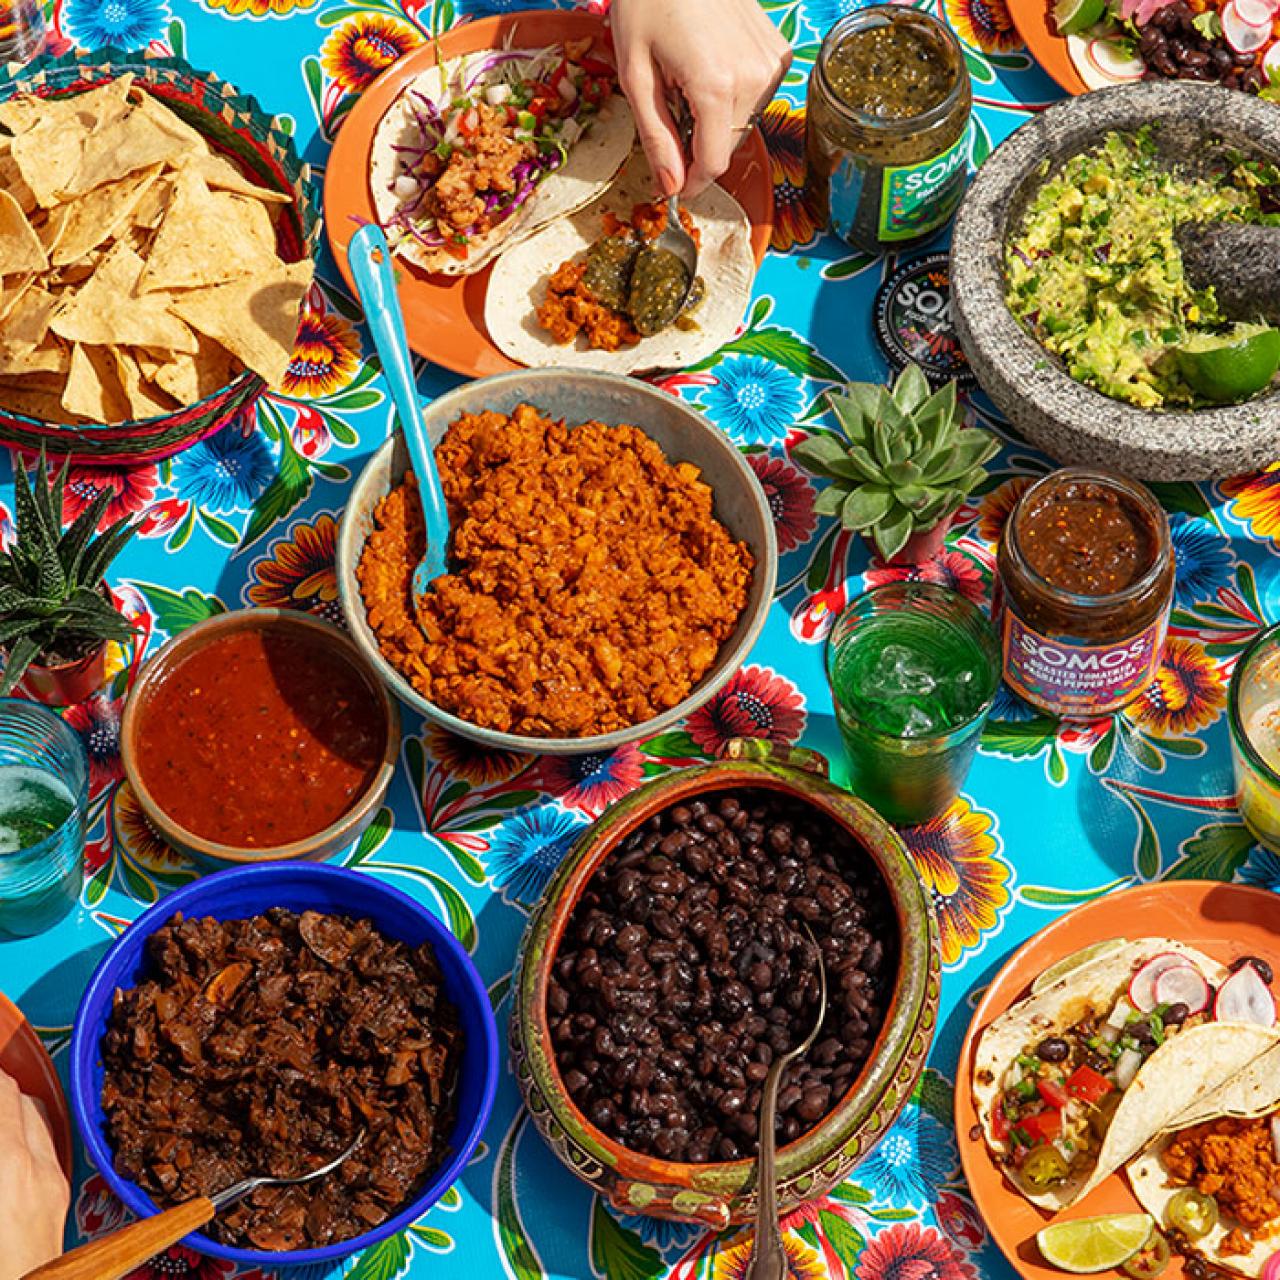 https://food.fnr.sndimg.com/content/dam/images/food/products/2022/5/4/rx_somos-taco-party_s4x3.jpg.rend.hgtvcom.1280.1280.suffix/1651676716068.jpeg